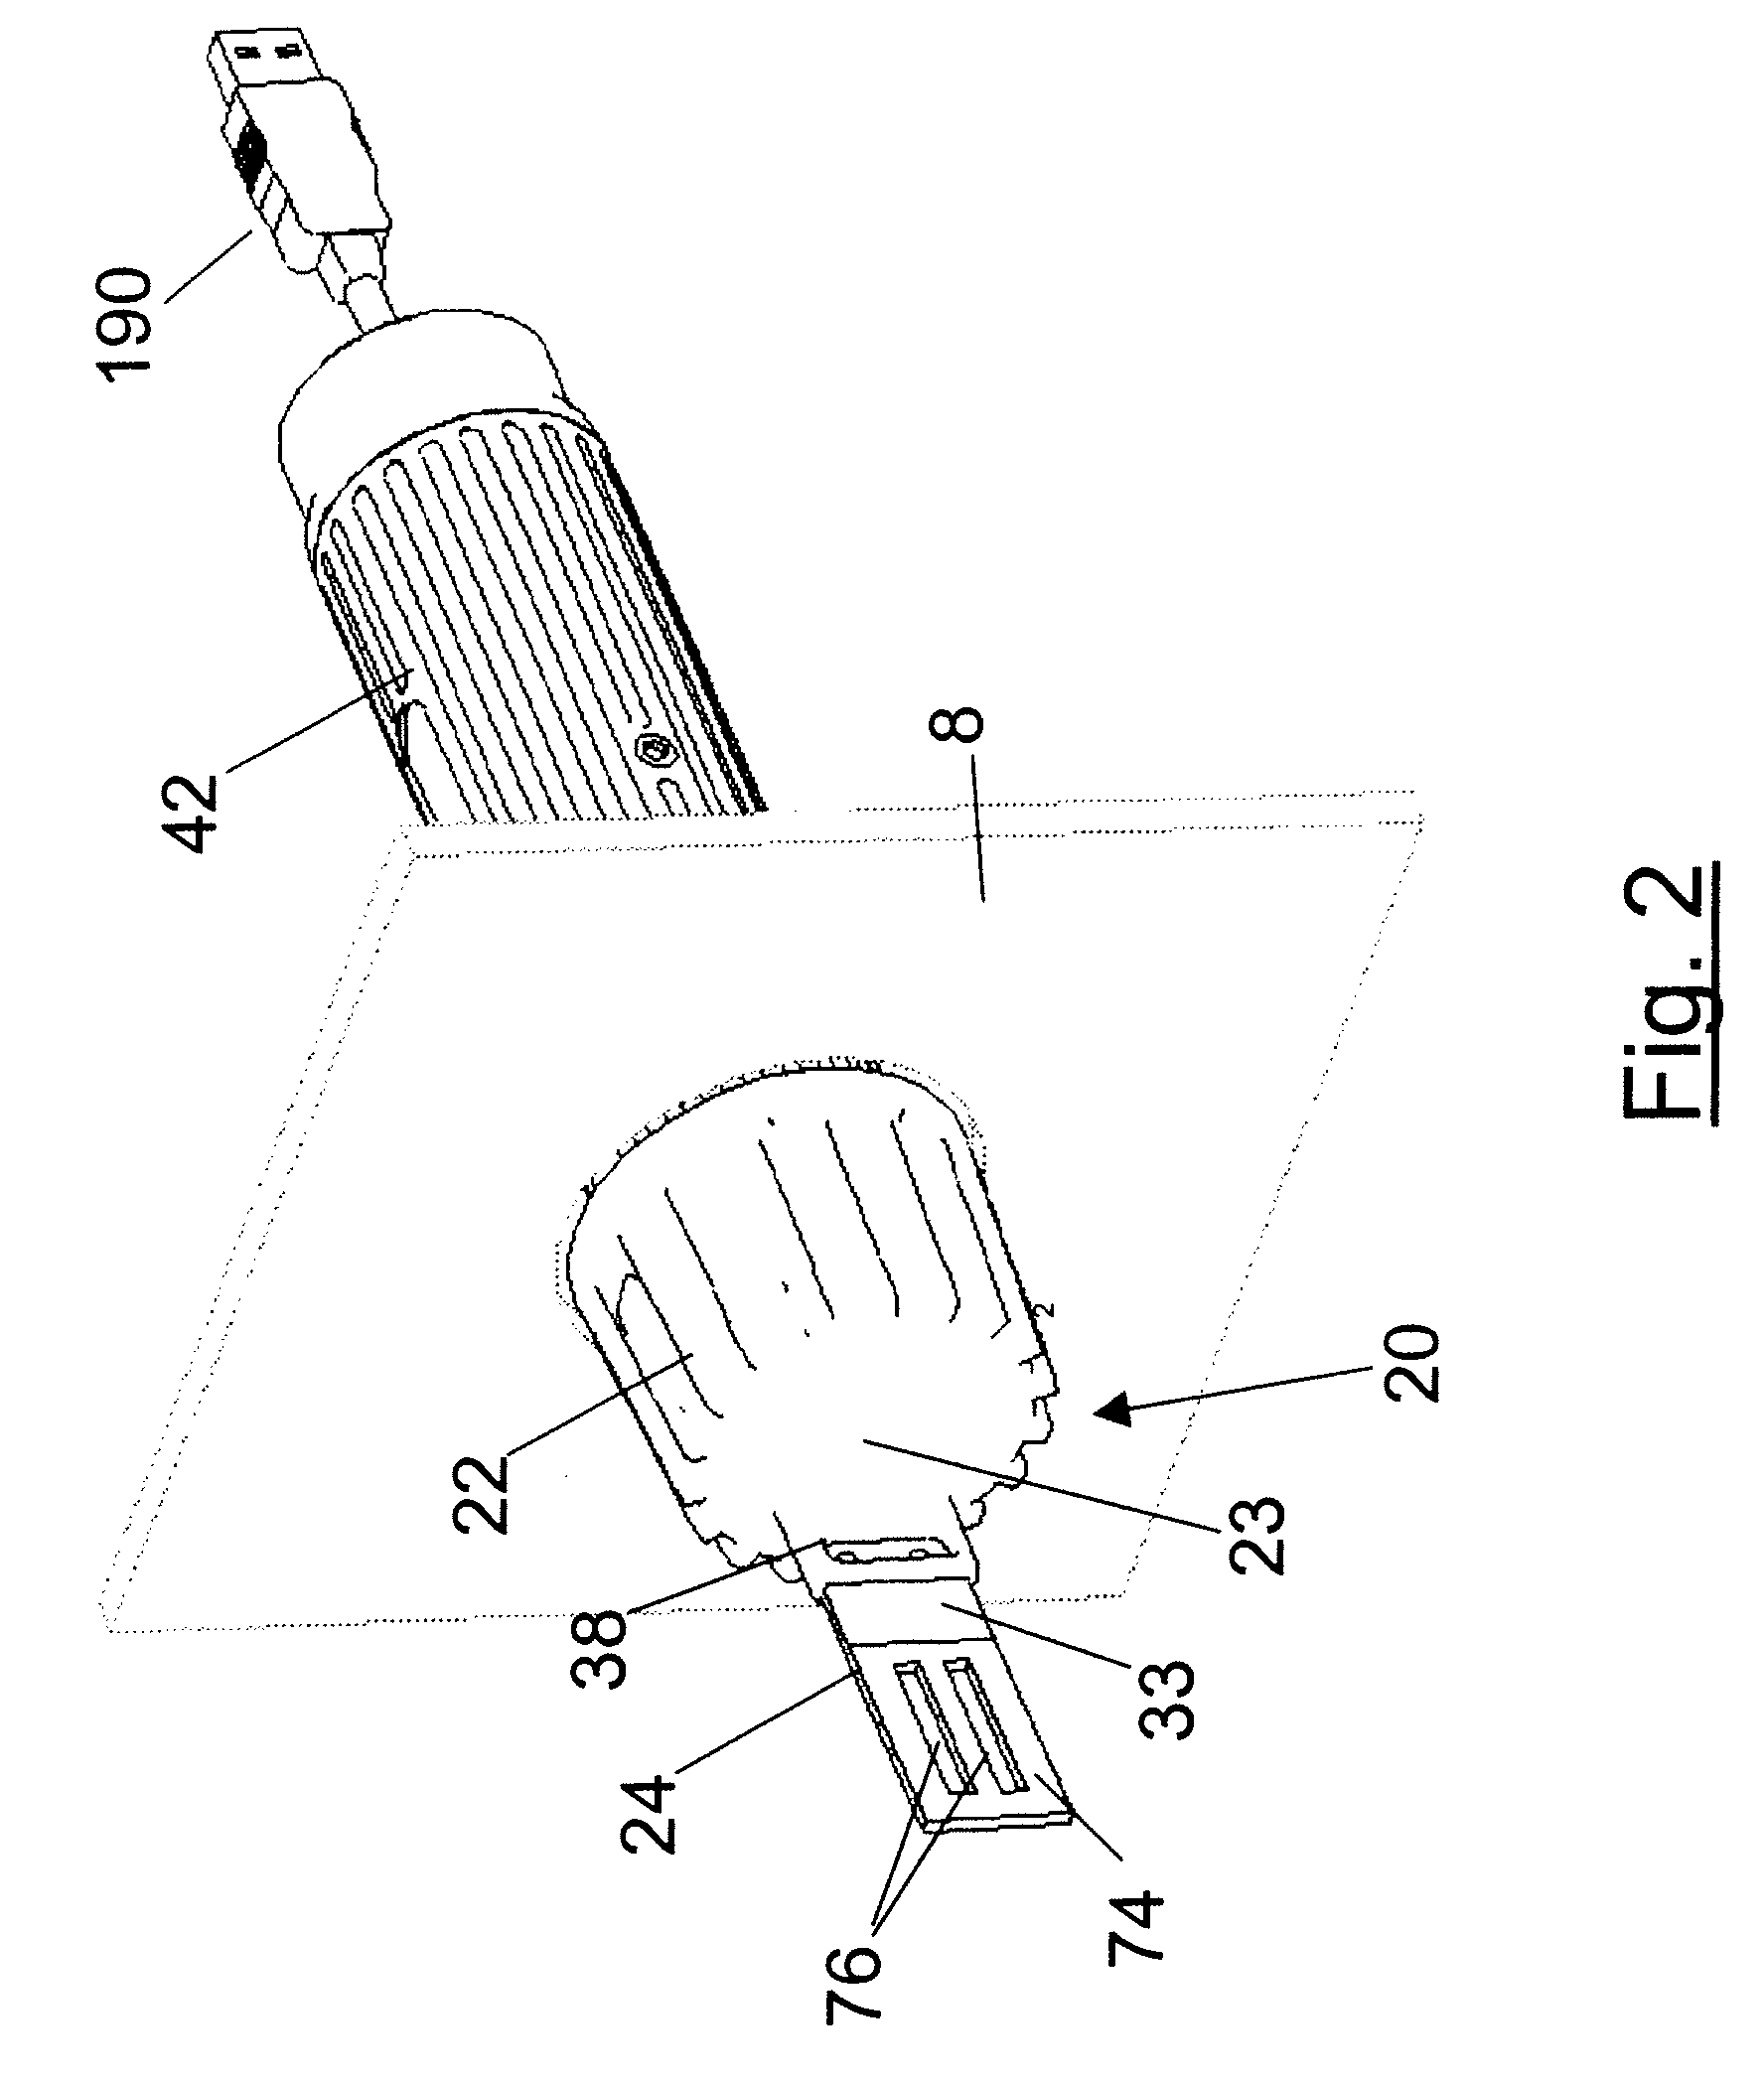 Apparatus and method for measurement of hardenable material characteristics